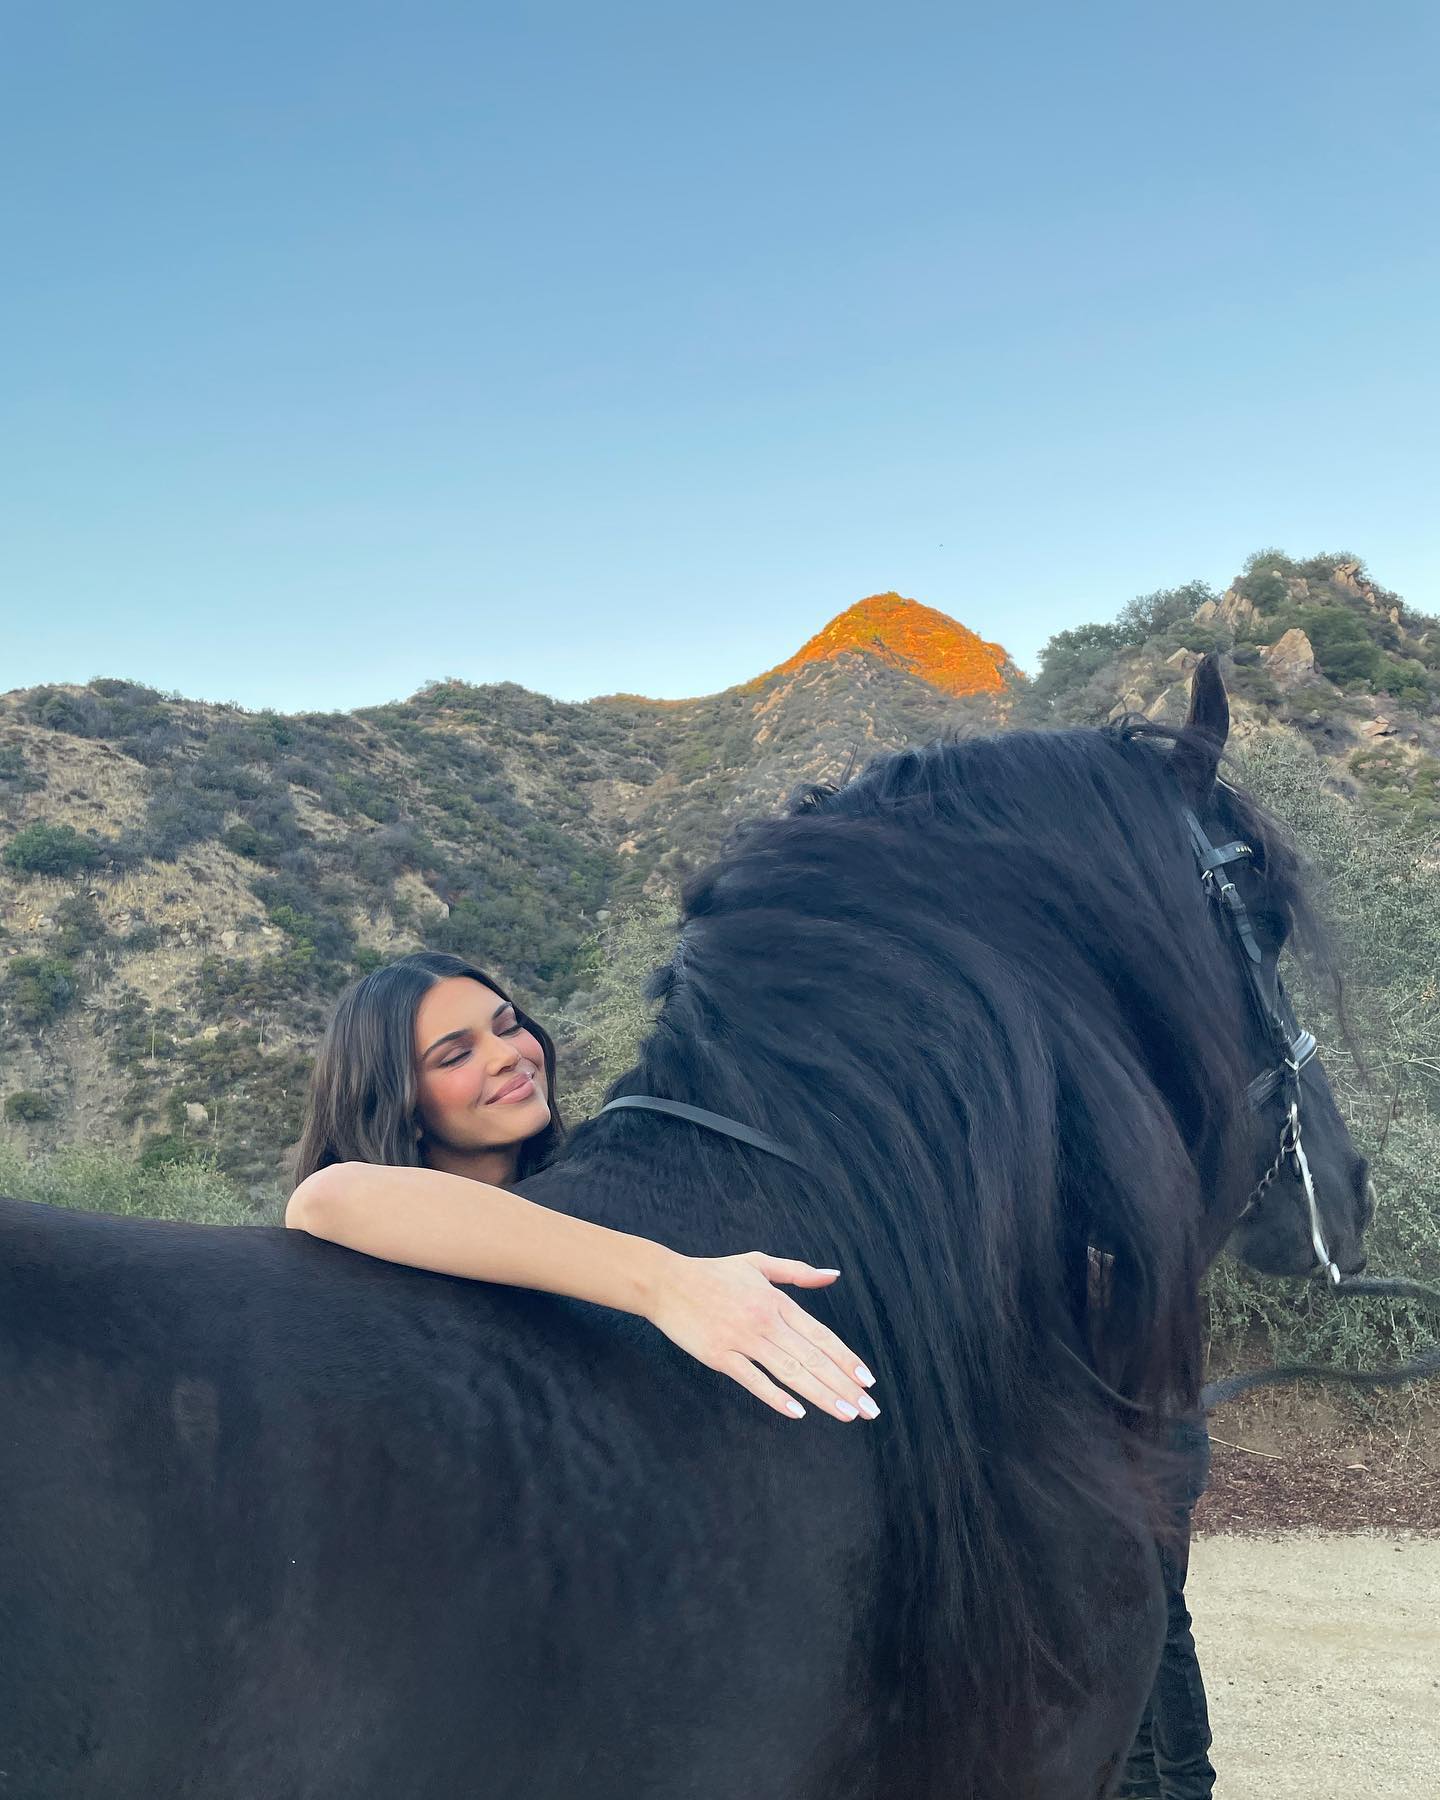 Kendall-Jenner-Baby-Horse